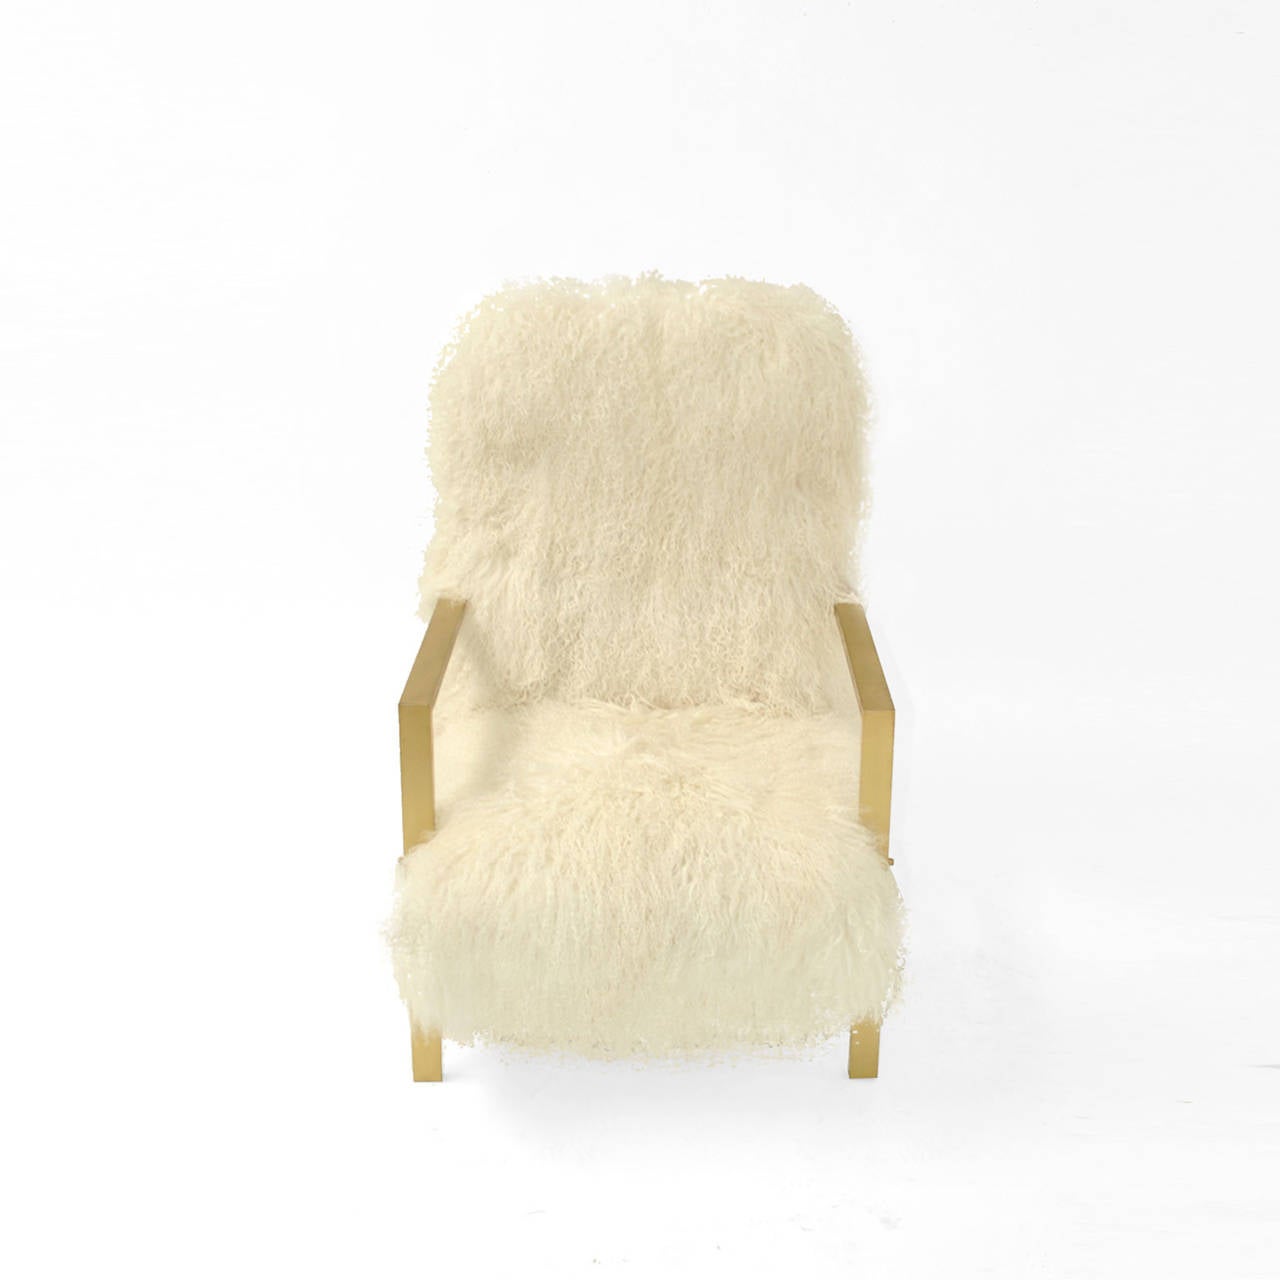 Comfortable armchairs designed by the creative team L.A. Studio and manufactured in Italy. Upholstered in natural white Mongolian goat´s fur.
Base made of solid wood, arms and legs are made of rectangular solid brass tube that continuous as a